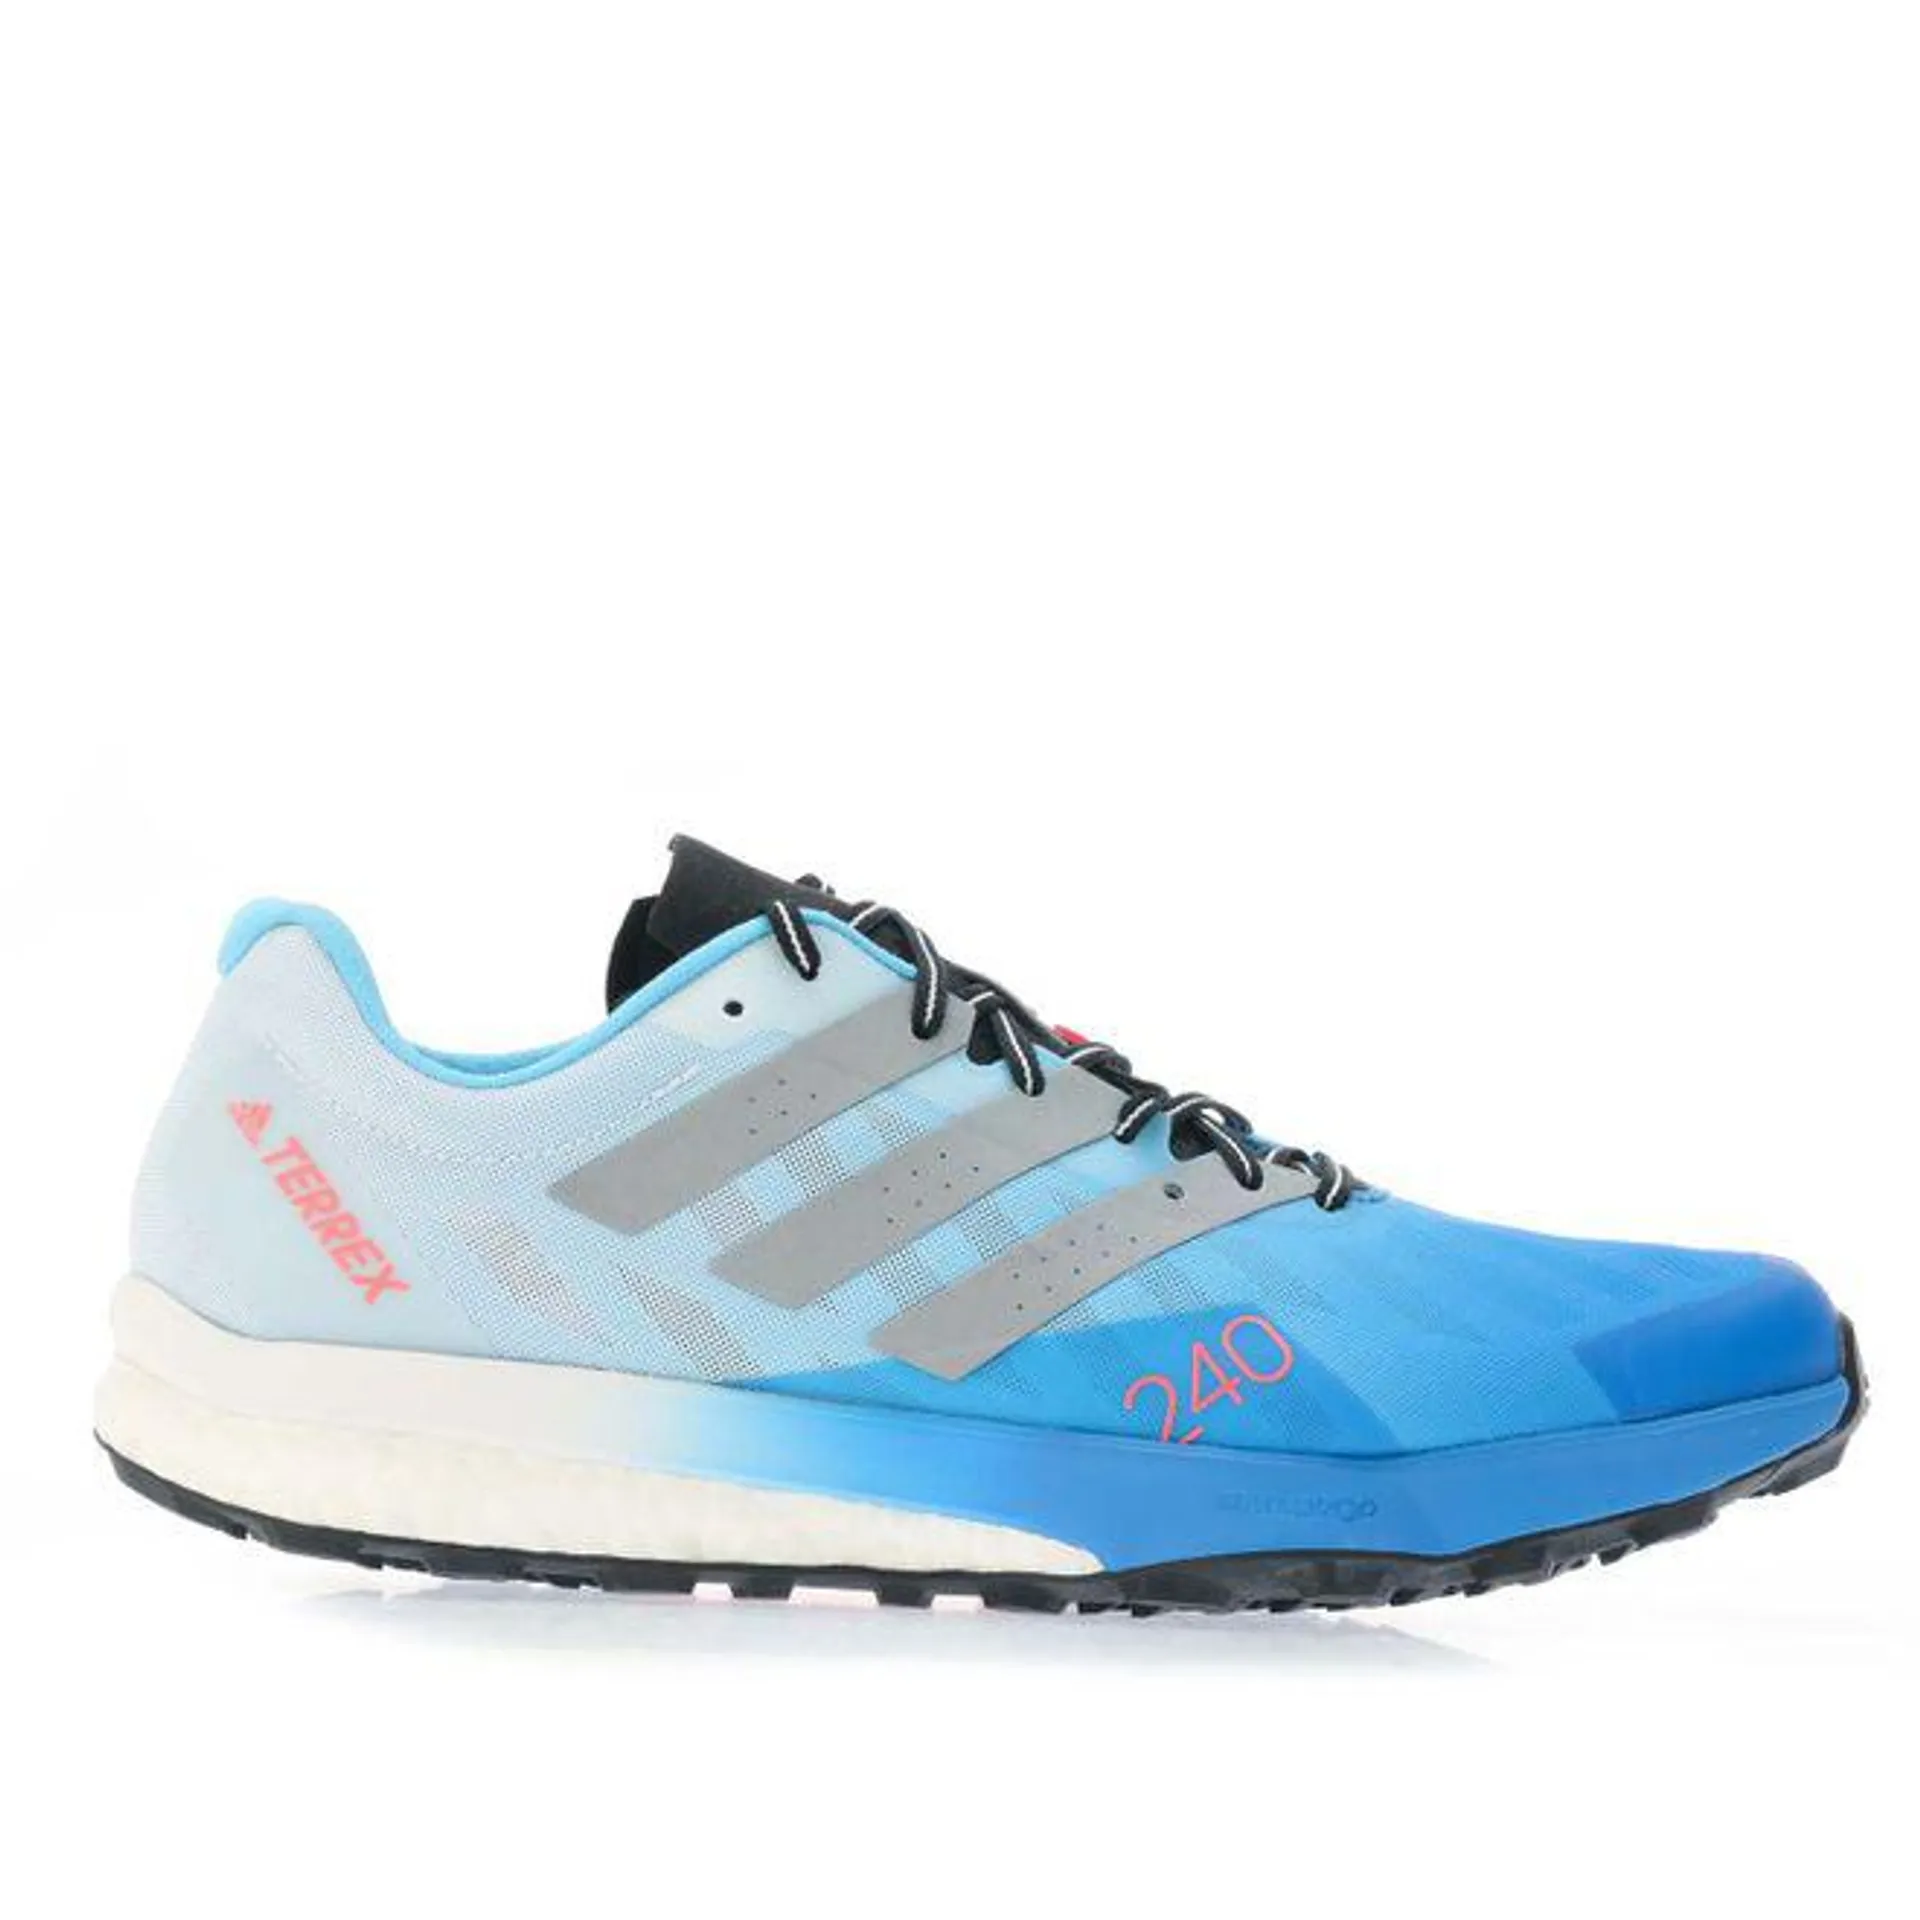 adidas Mens Terrex Speed Ultra Trail Running Shoes in Blue